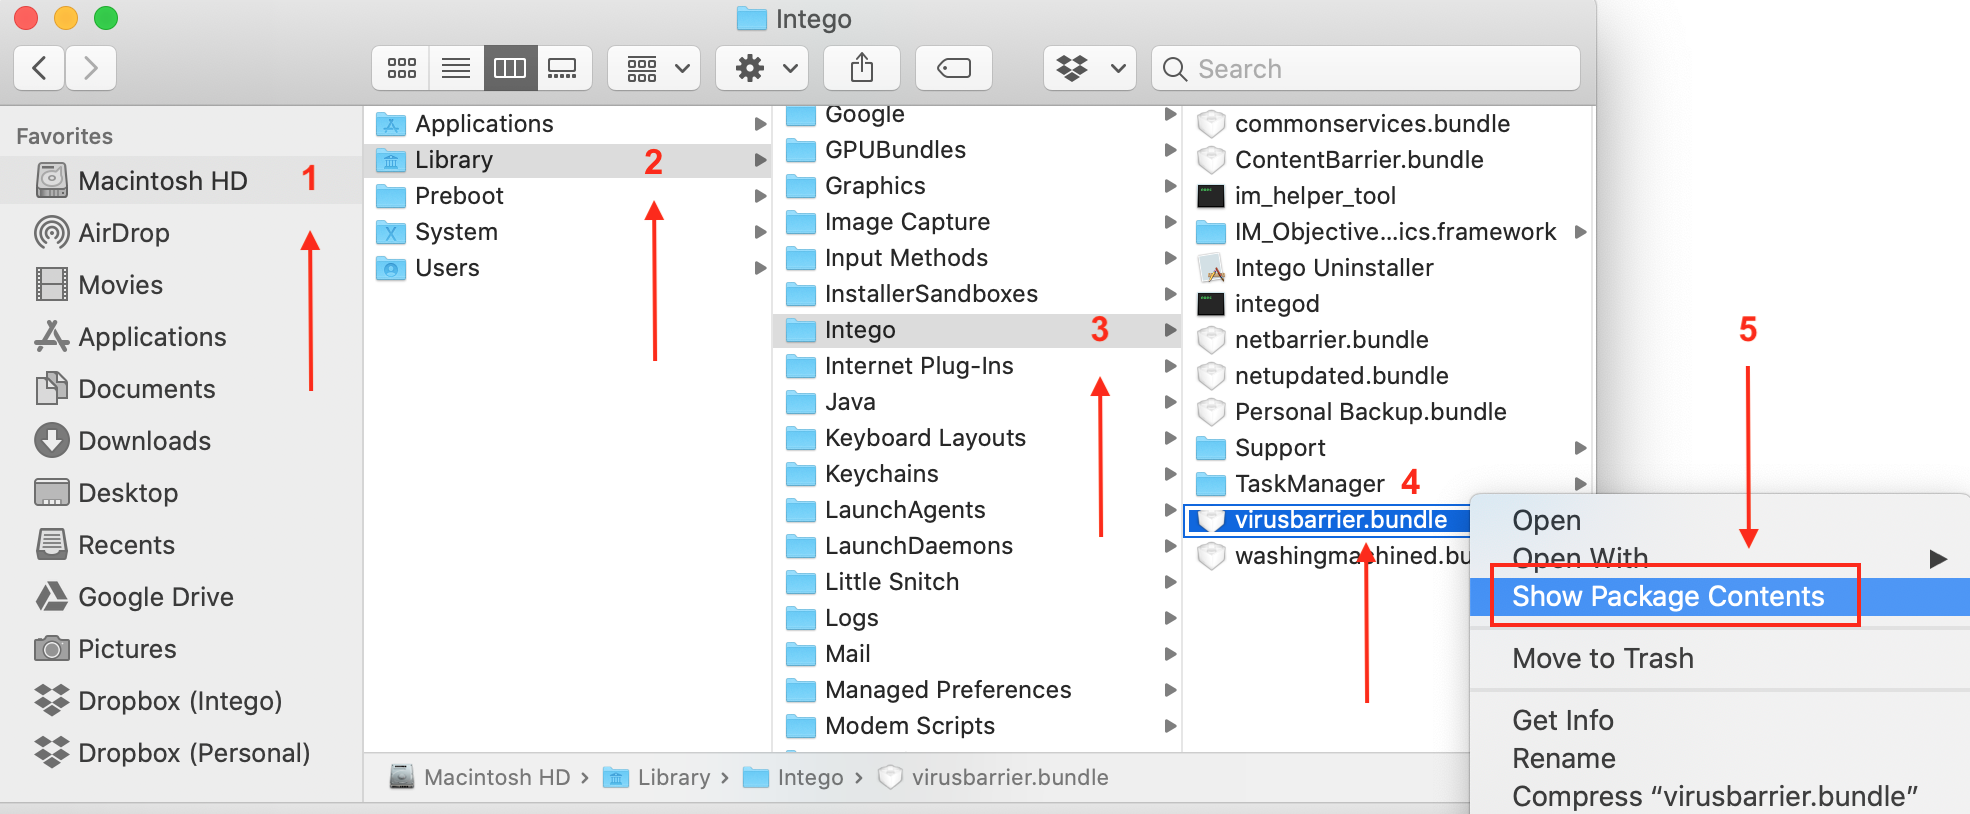 enable google auto updates script for all users mac